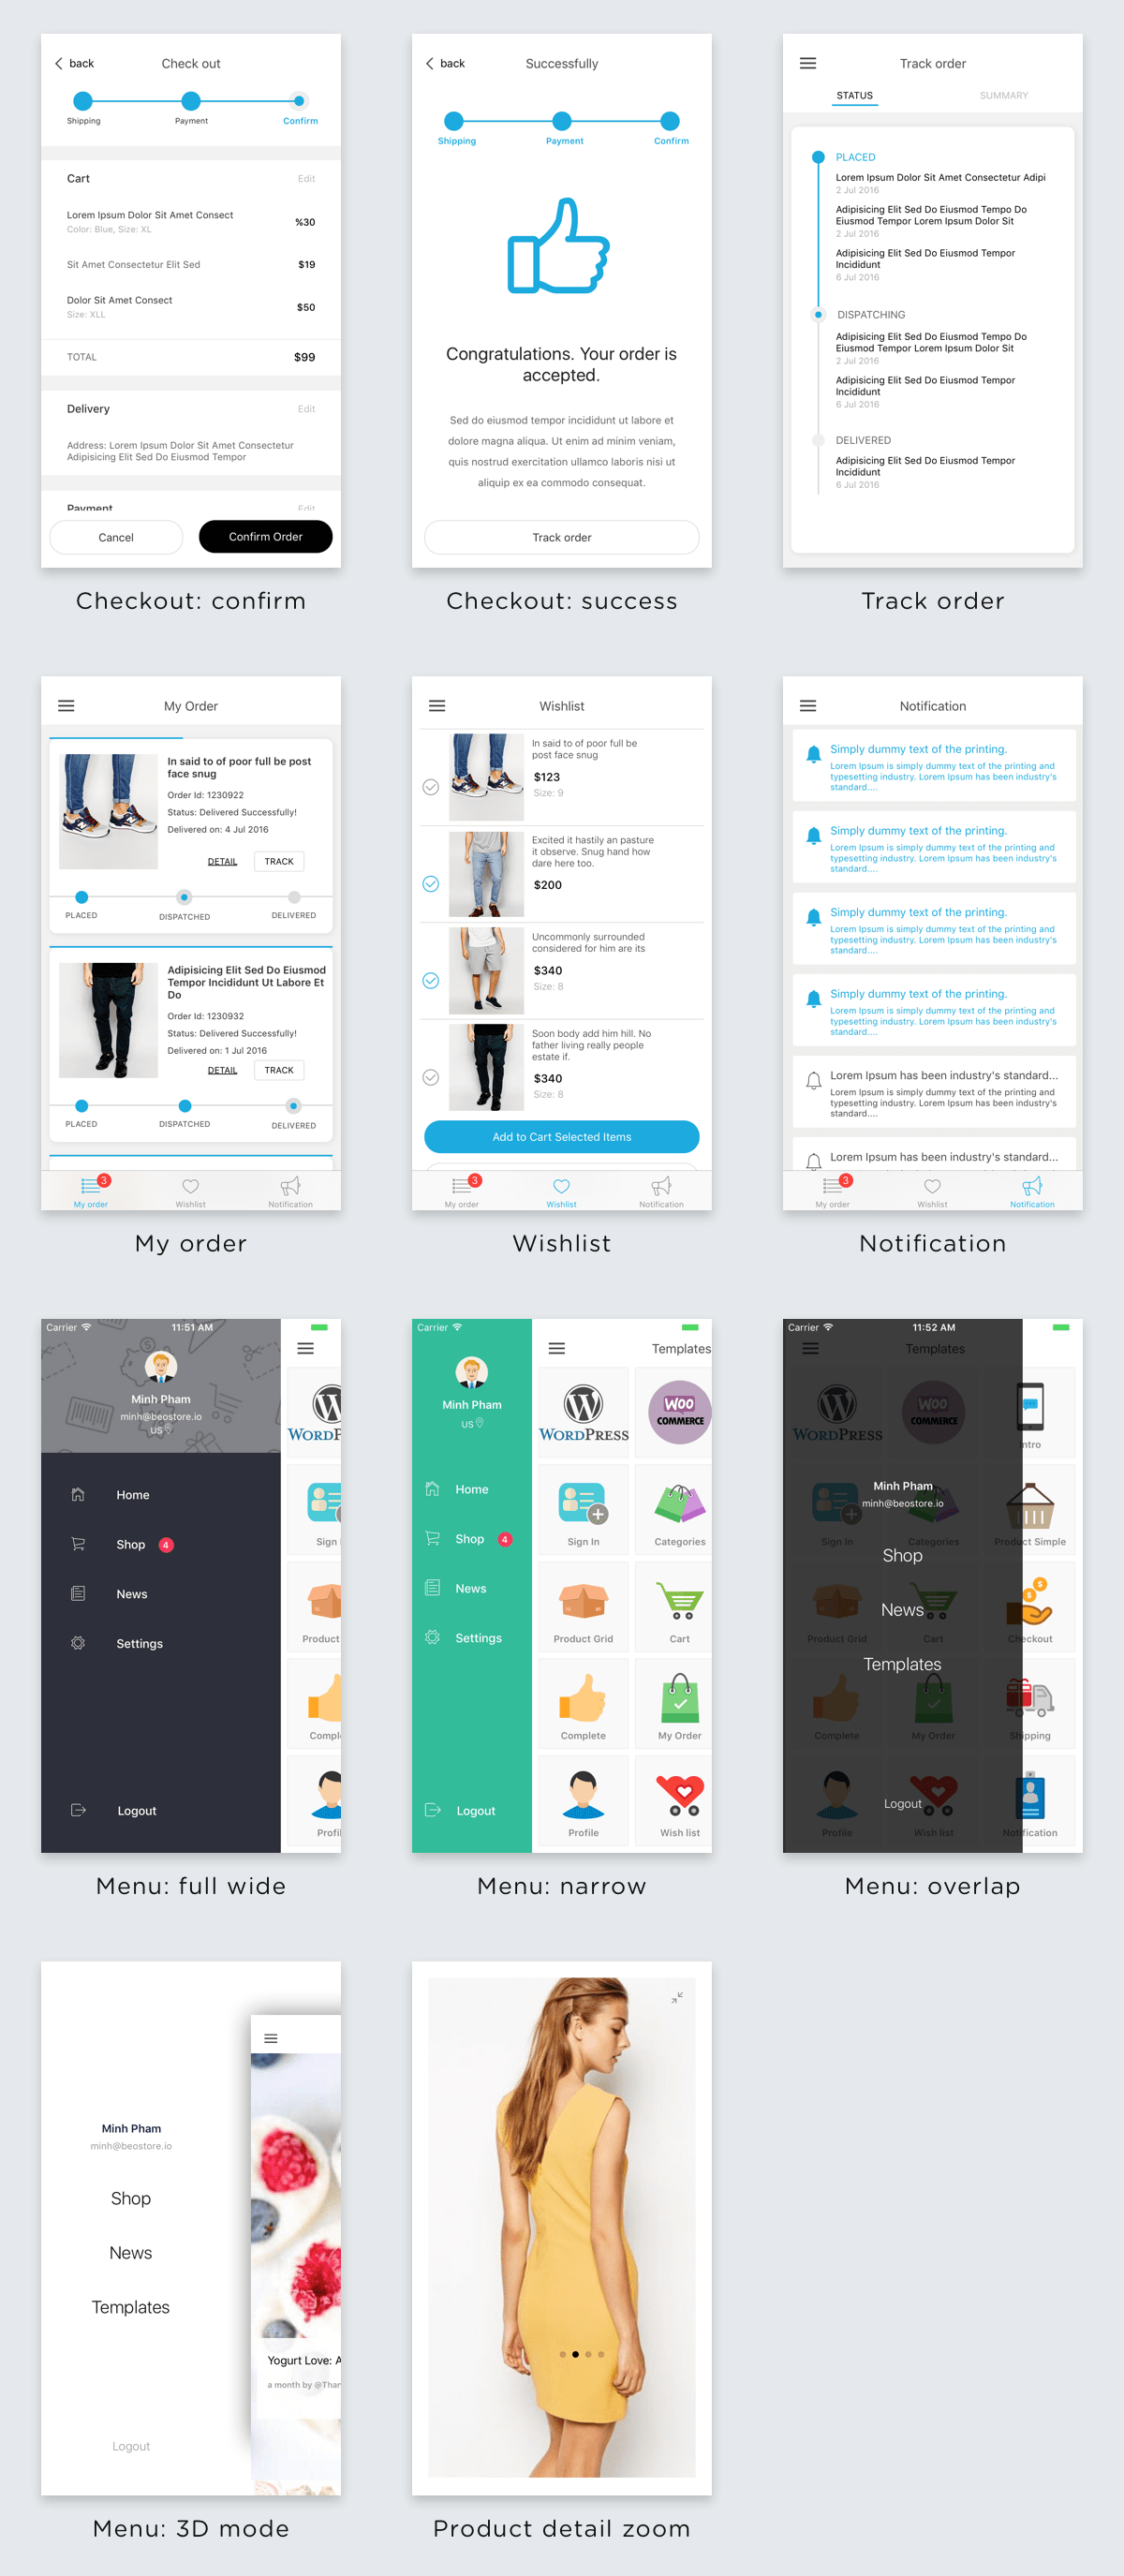 BeoStore - Complete Mobile UI template for React Native - 5